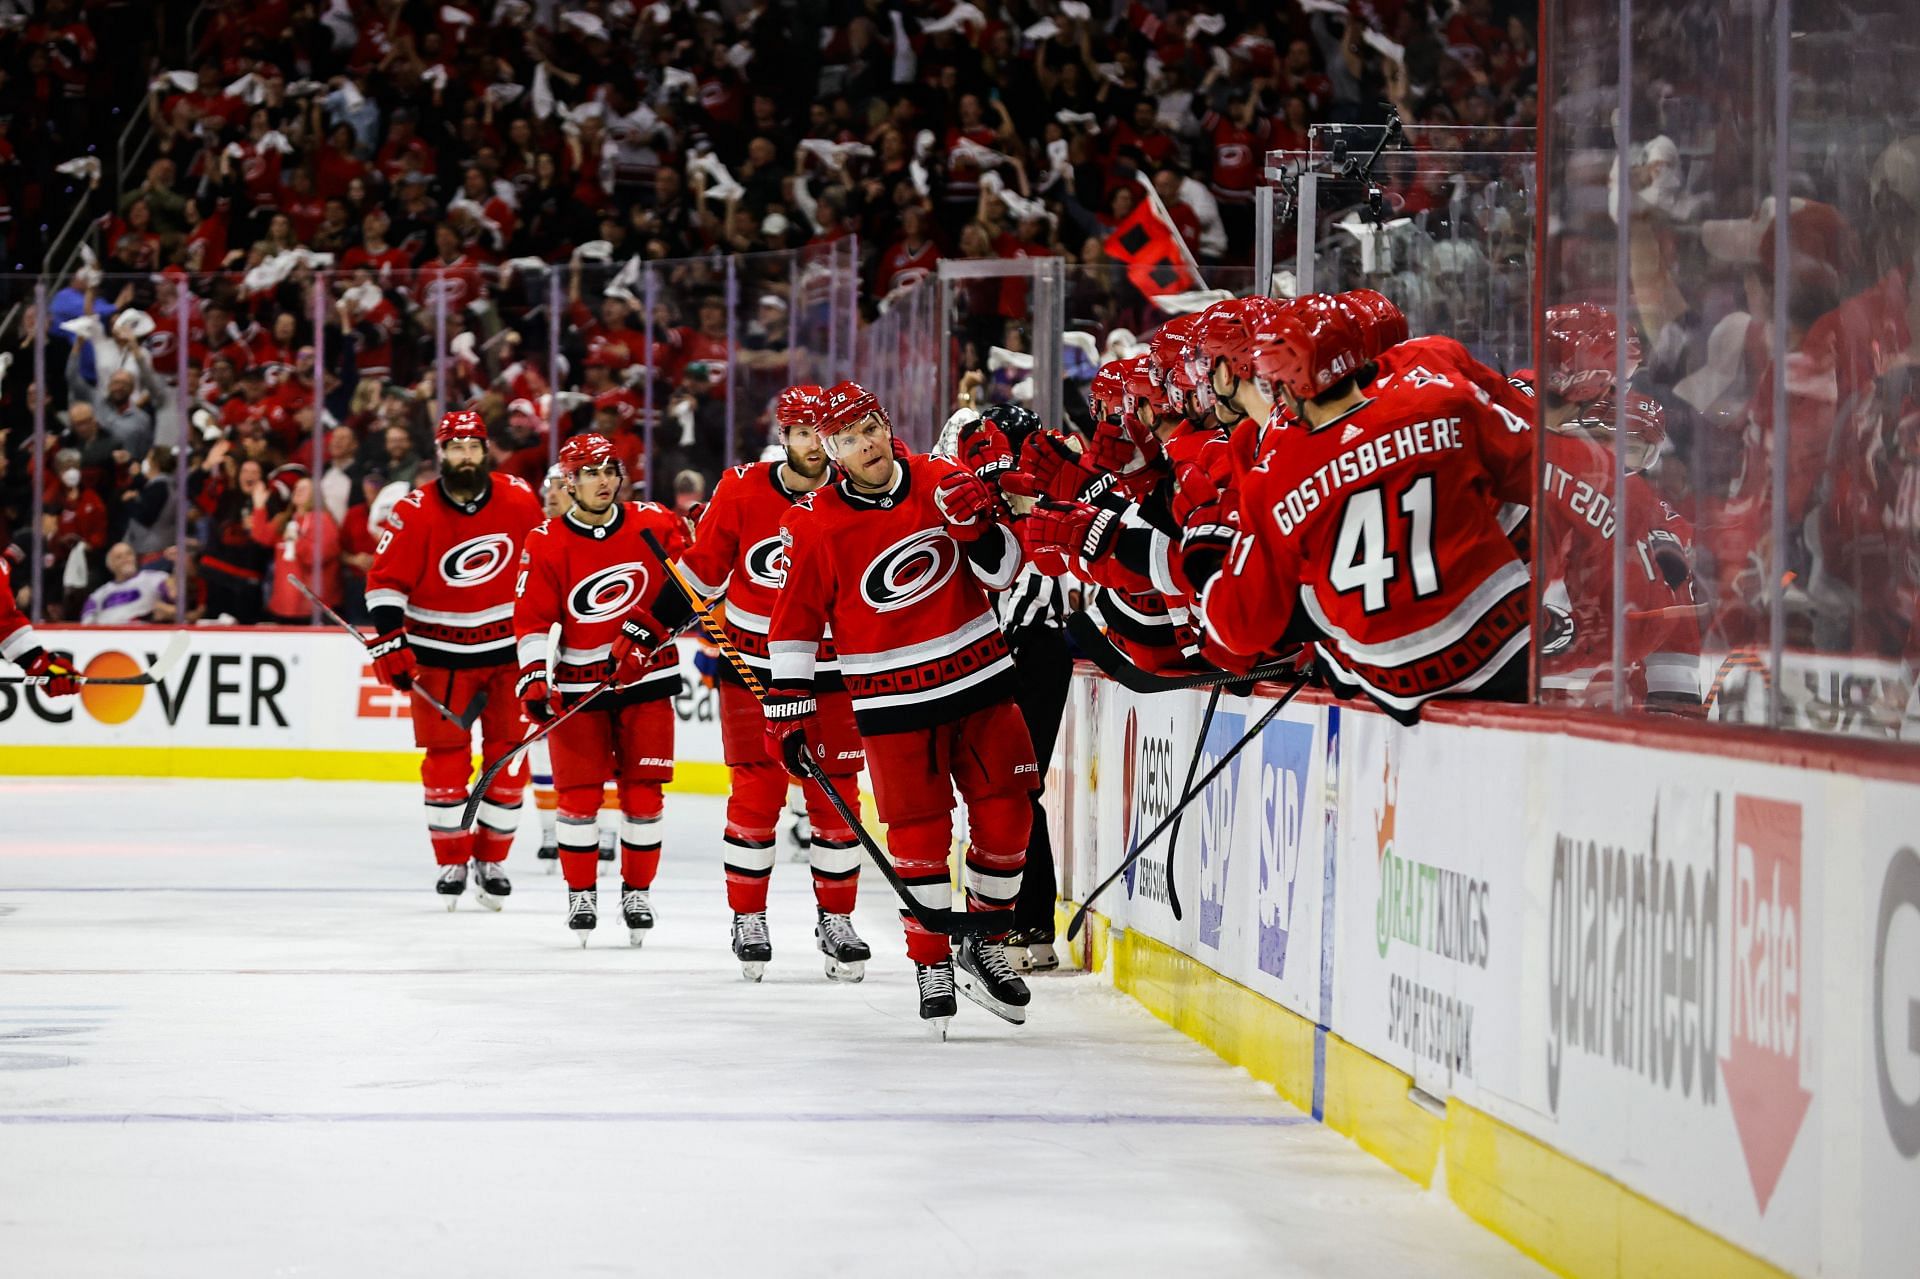 WATCH Carolina Hurricanes players left stunned after they score flukey